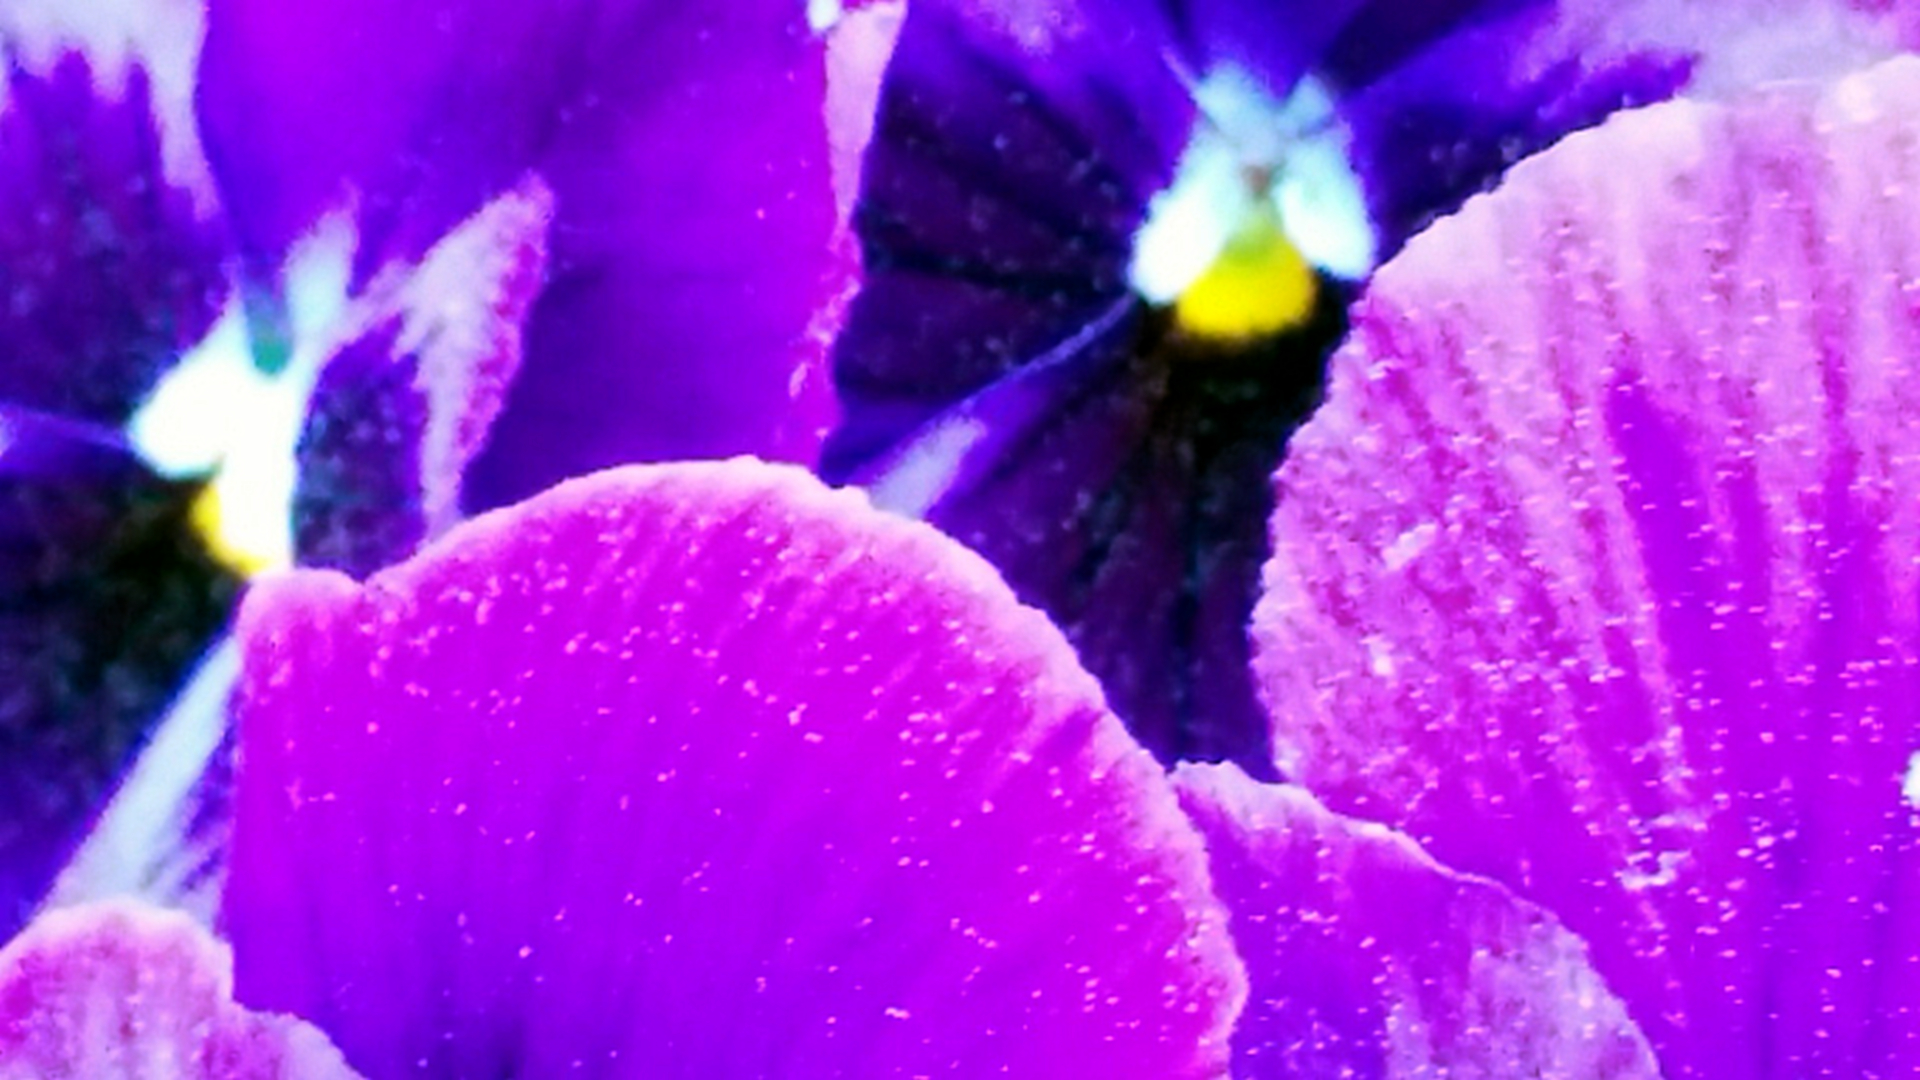 Macro of purple pansies in soft focus. Lighter colored outer parts of petals are in the foreground. In the background are two yellow and white centers, each surrounded by darker colored inner parts of petals. The image has an abstract look. There are two separate treatments of this image, each meant to represent a relative intensity of desire, hence the name. This is the original photo, representing the initial spark of desire.